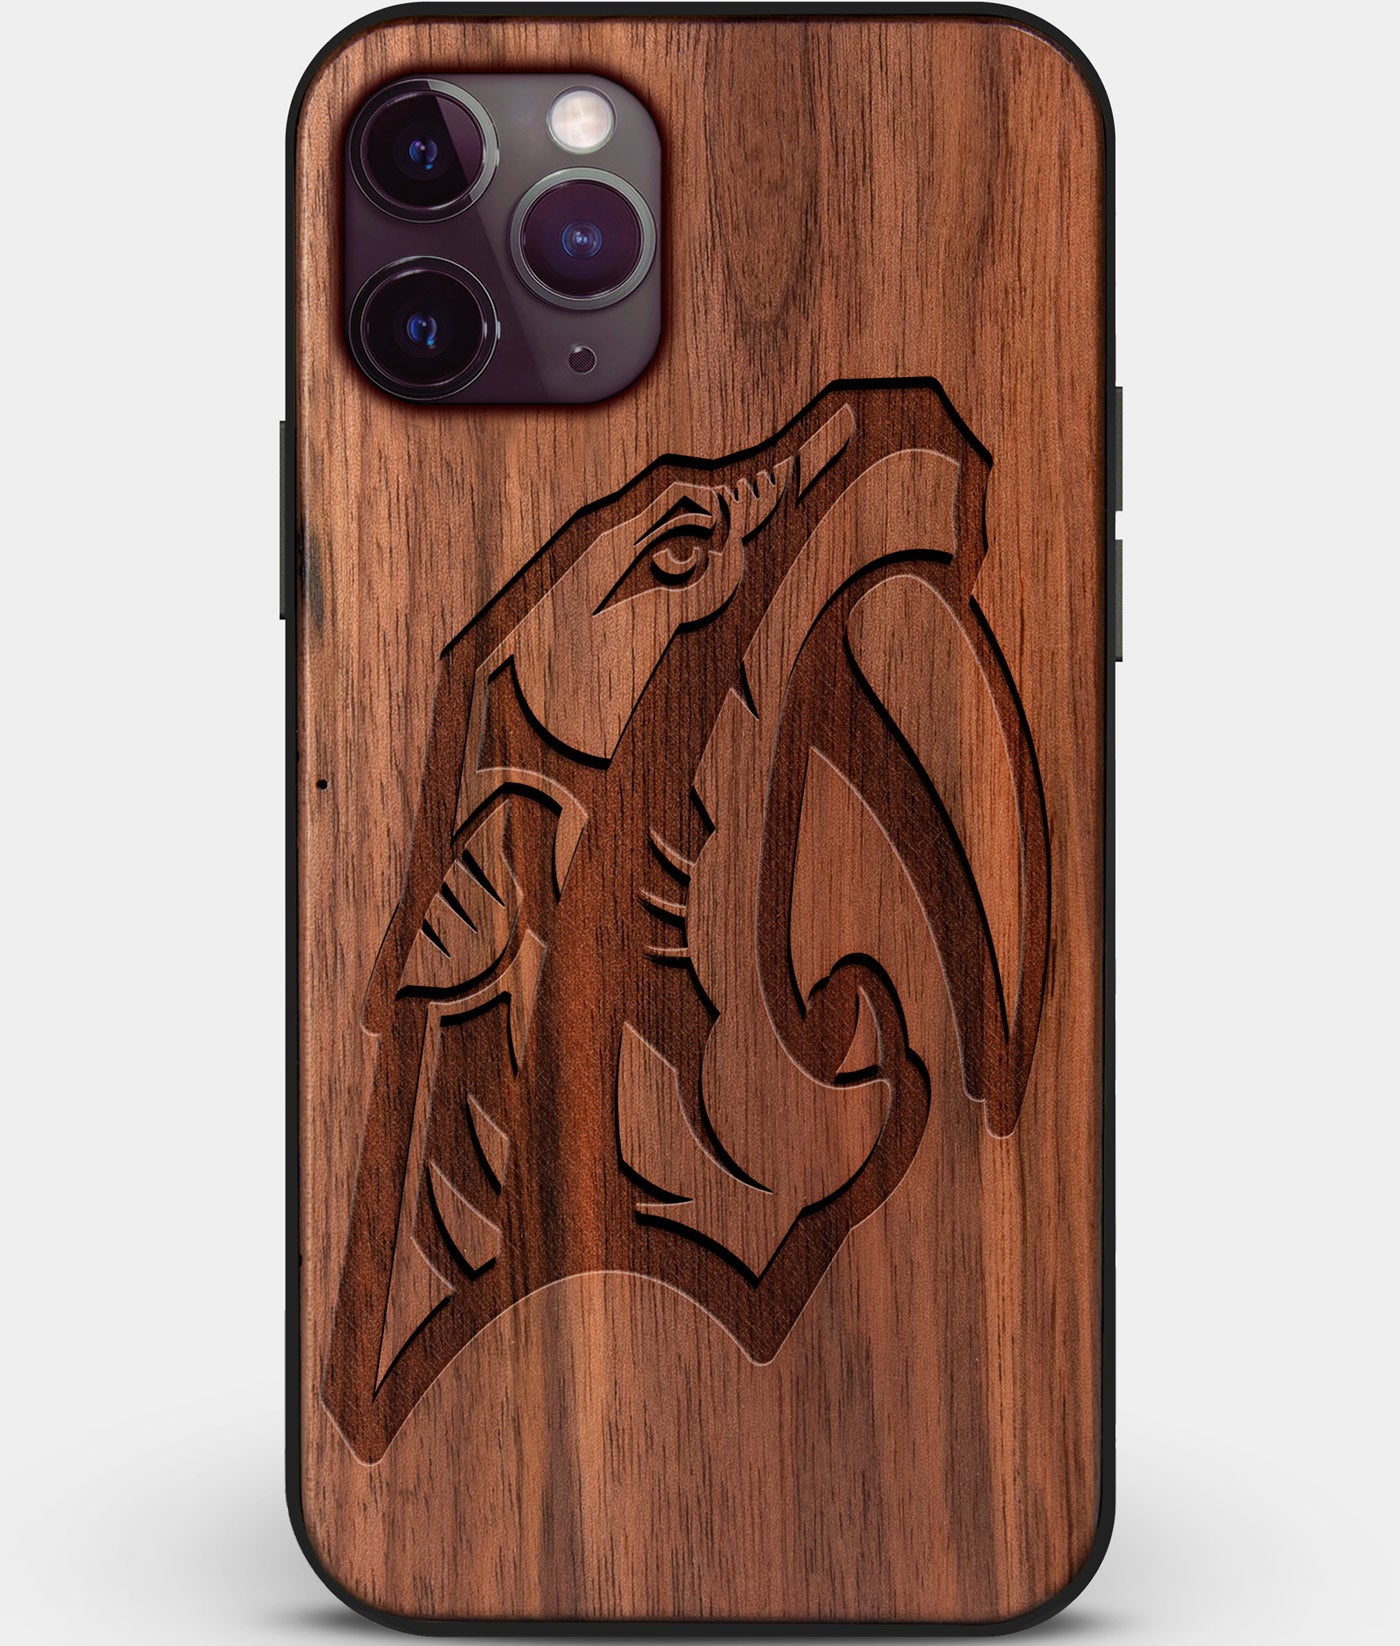 Custom Carved Wood Nashville Predators iPhone 11 Pro Max Case | Personalized Walnut Wood Nashville Predators Cover, Birthday Gift, Gifts For Him, Monogrammed Gift For Fan | by Engraved In Nature